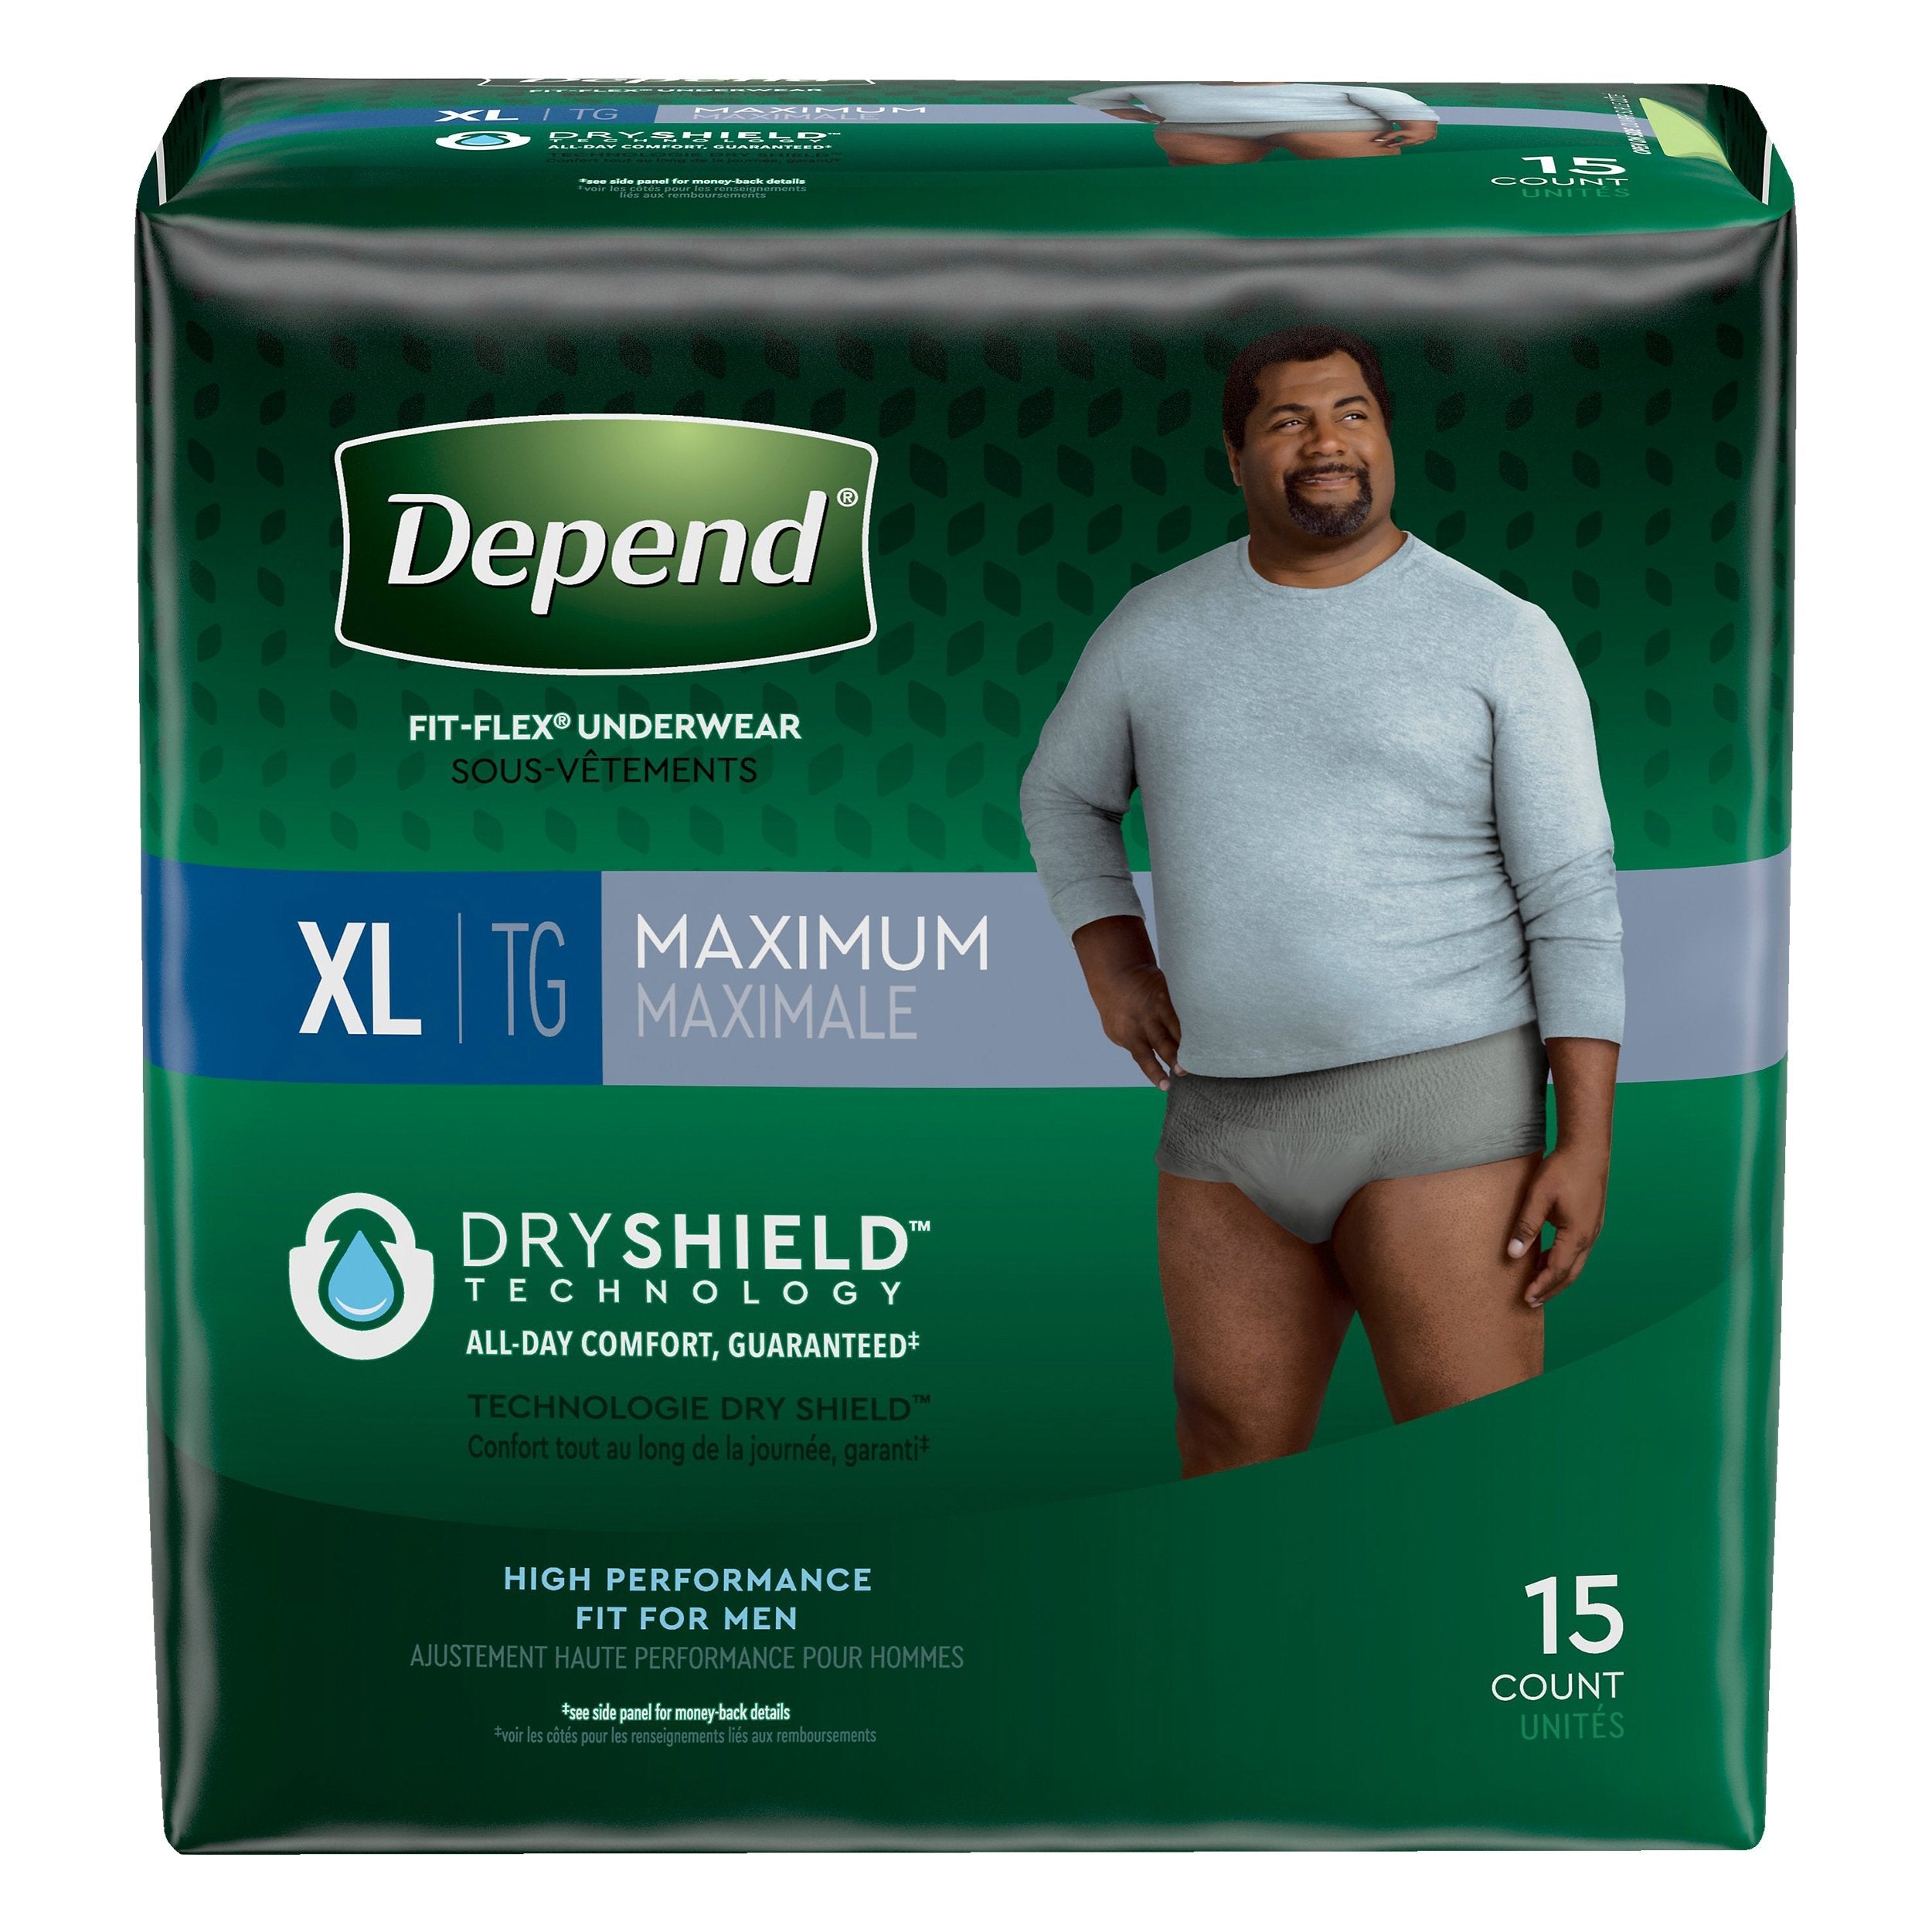 Depend Fit-Flex Incontinence Underwear for Men, Small/Medium, Two